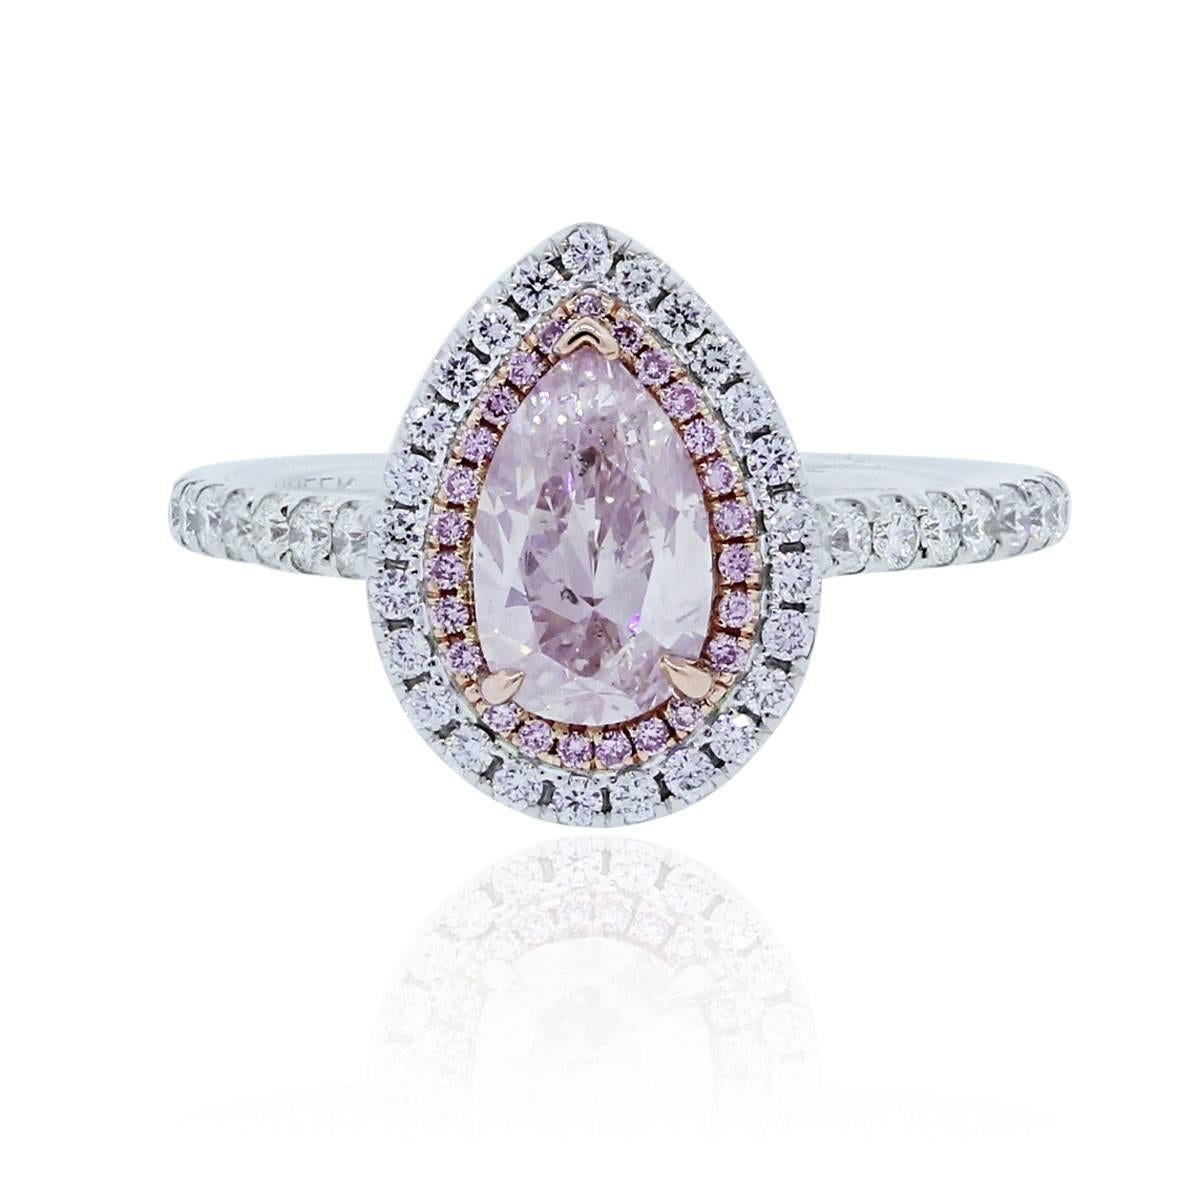 Style: Uneek 18k White Gold GIA 1.01ct Pink Pearshape Diamond Engagement Ring
Material: 18k White Gold & Rose Gold Prongs
Center Diamond Details: 1.01ct Natural Pink Pear Shaped diamond measuring 8.25 x 5.11 x 3.56 mm
Mounting Diamond Details: